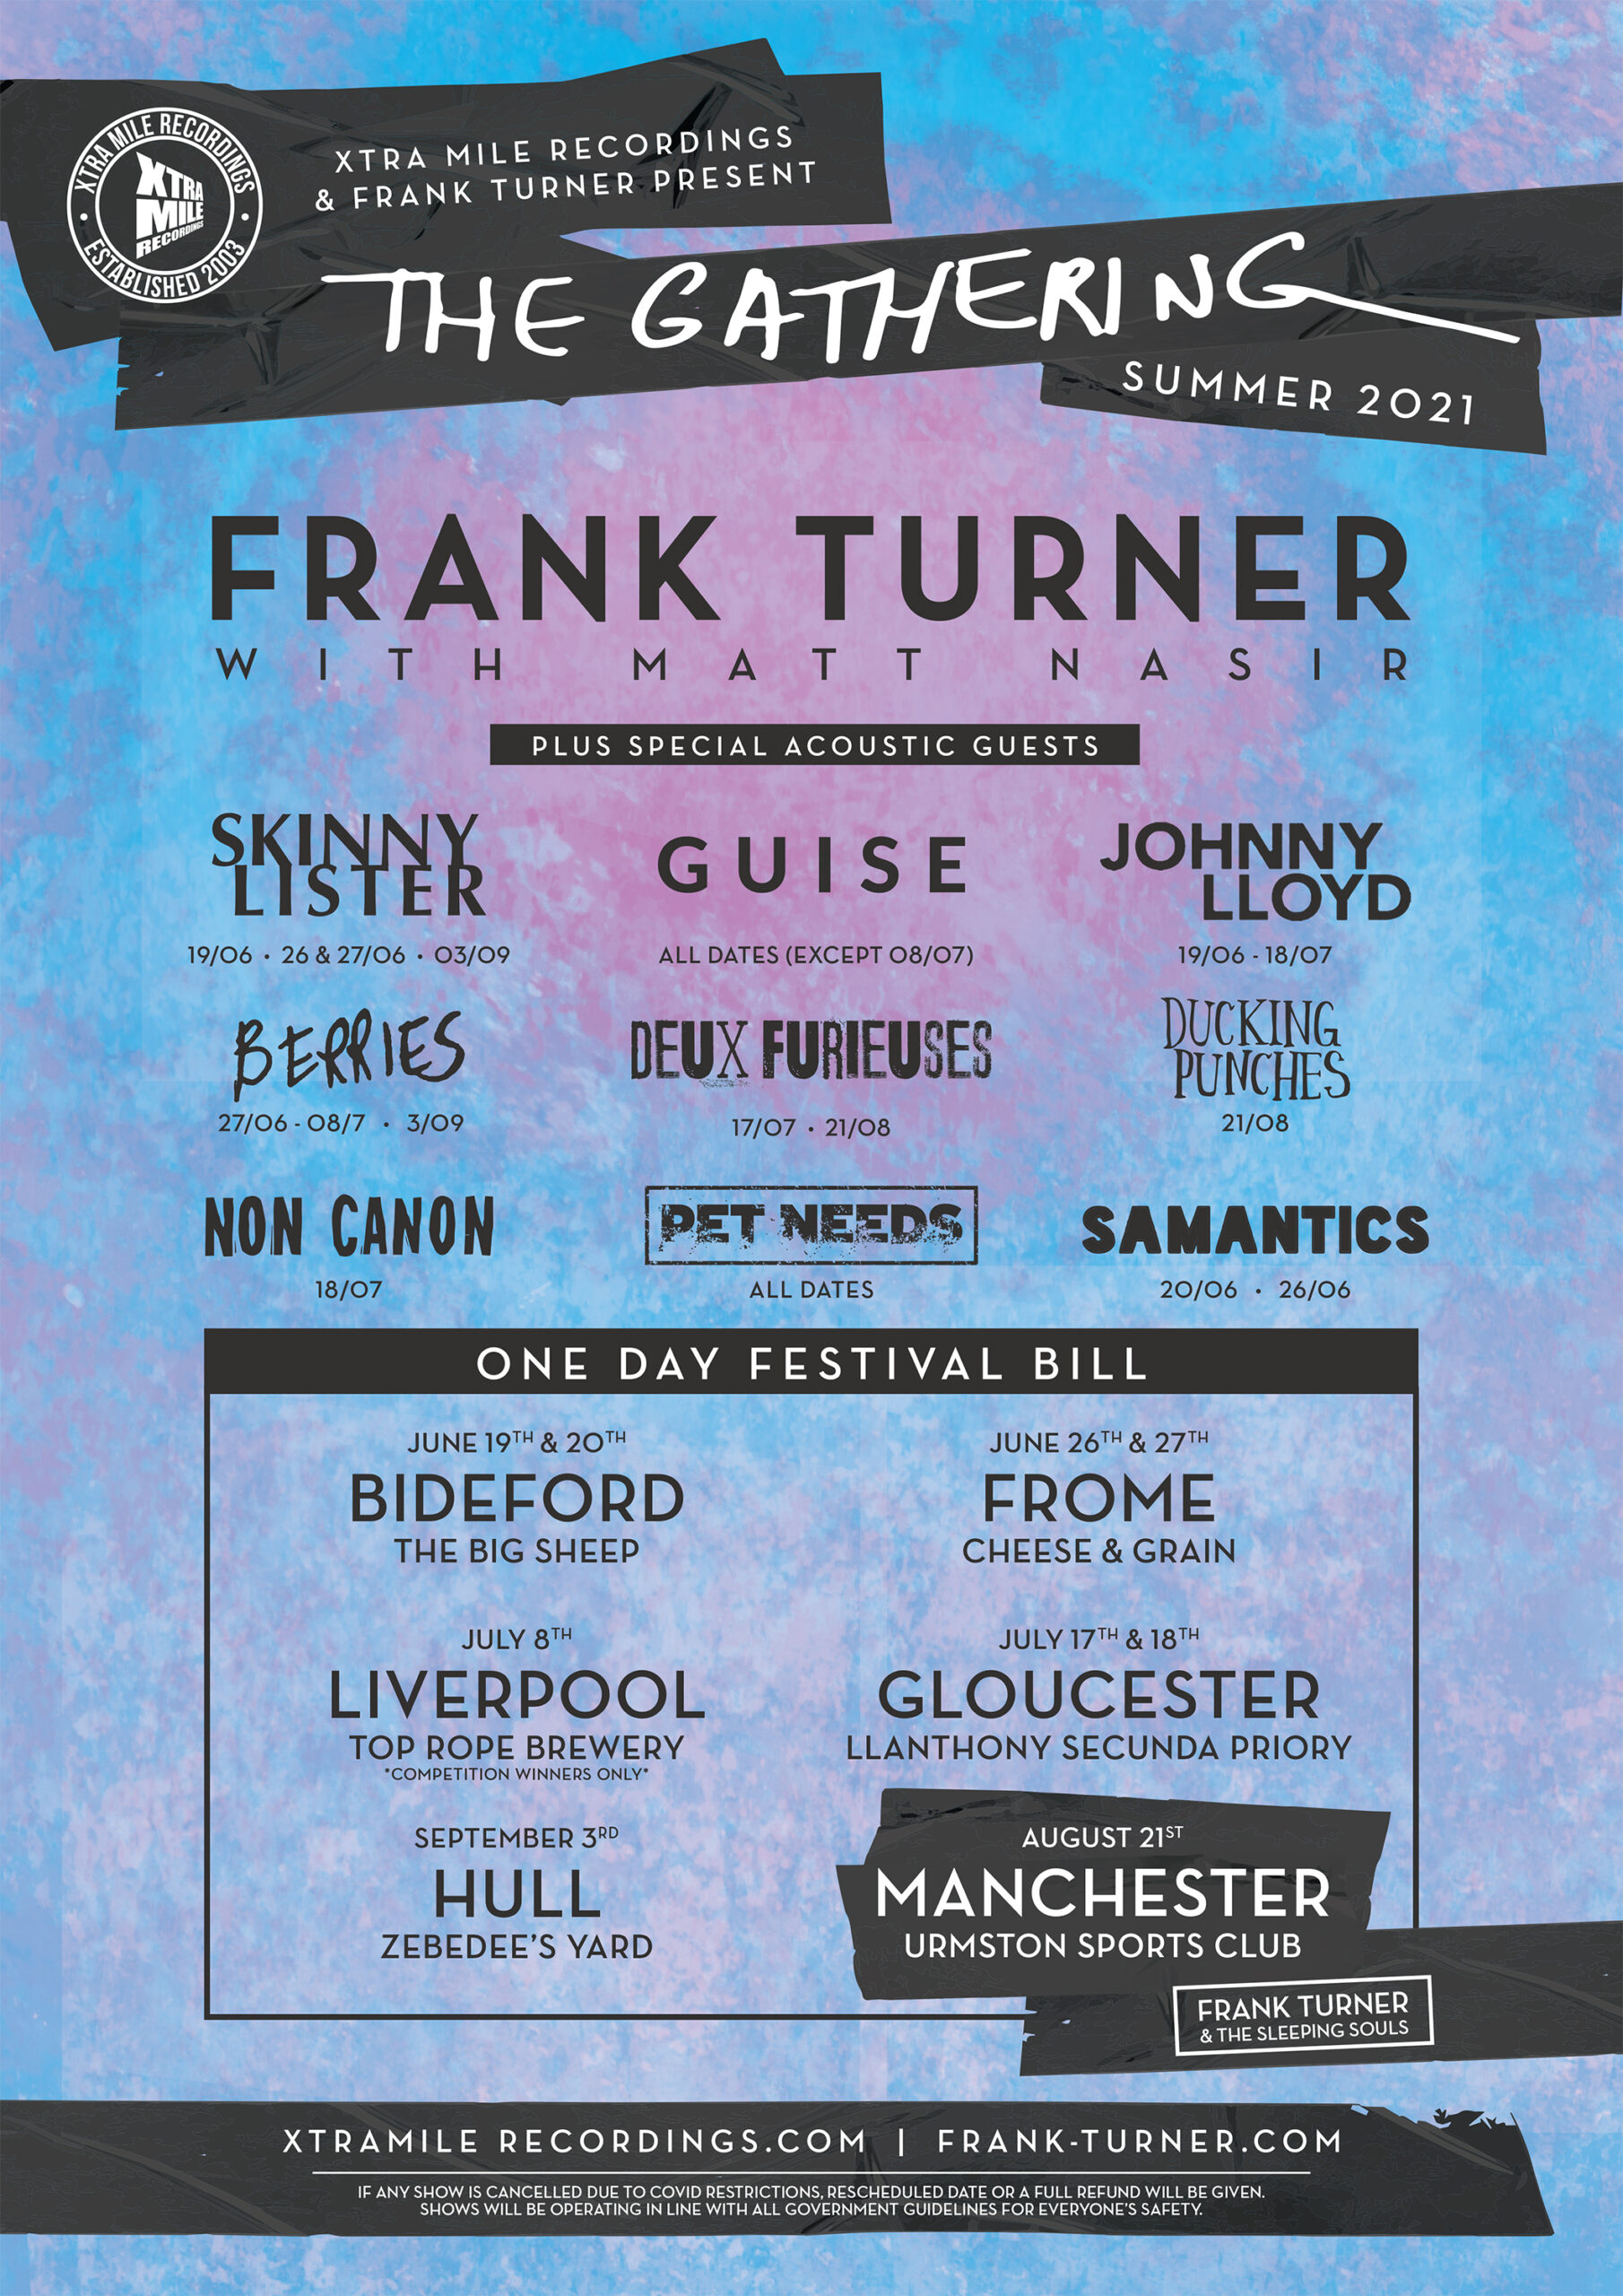 Frank Turner announces “The Gathering” live shows.